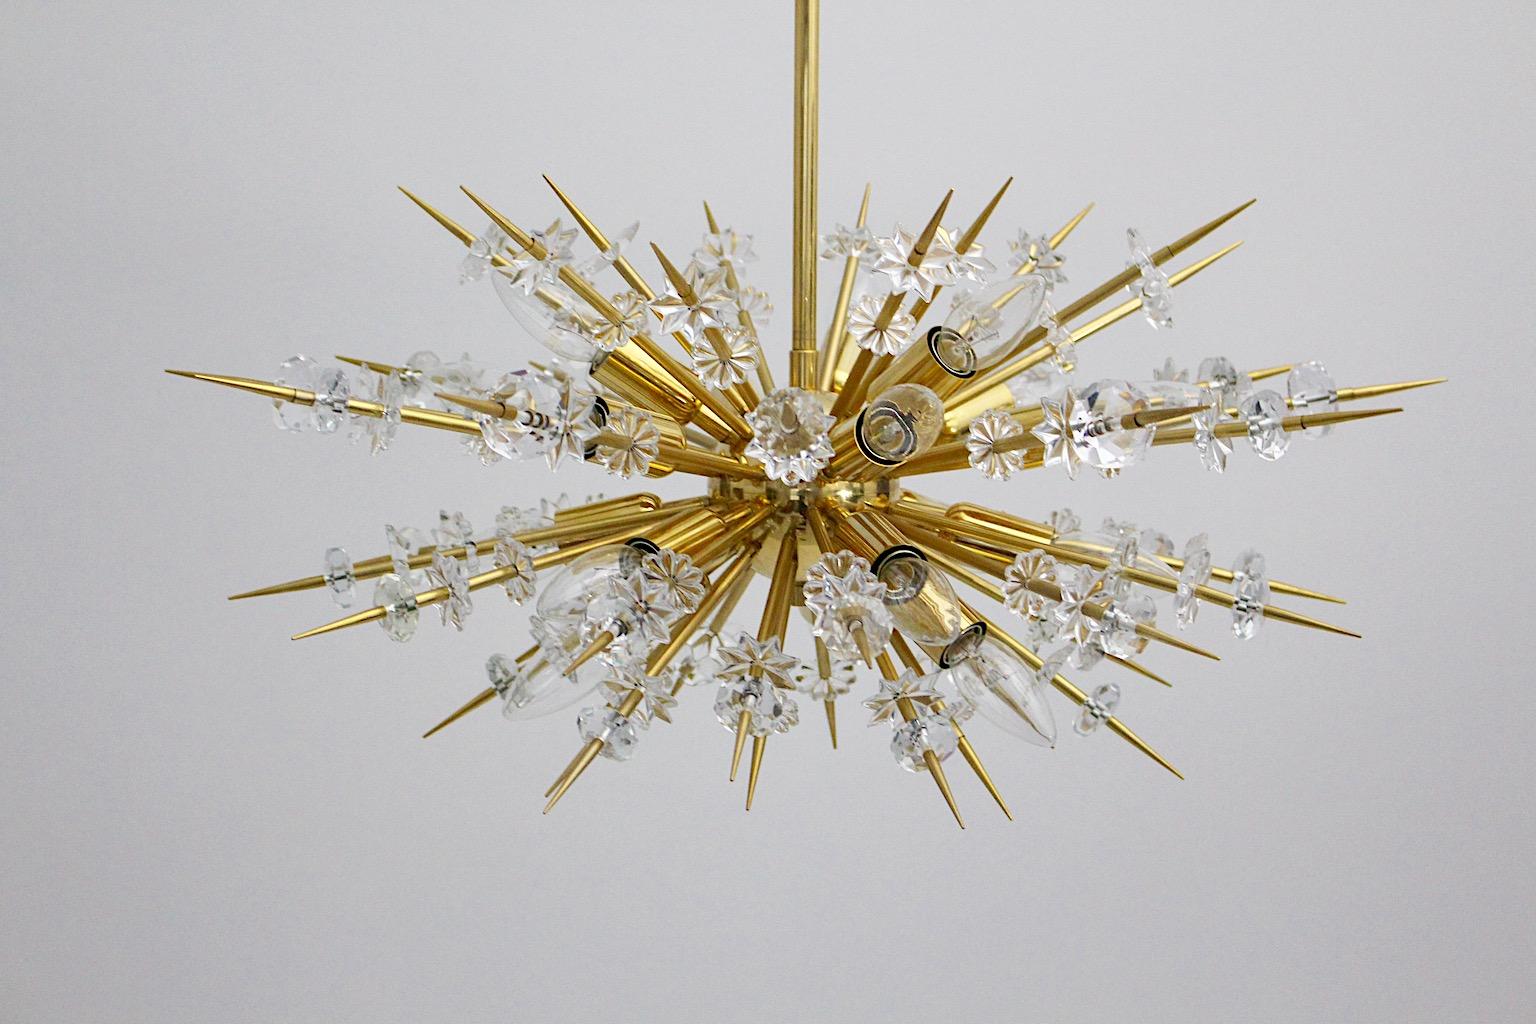 Modernist vintage sputnik chandelier or pendant from gold plated metal and glass designed and executed by Bakalowits & Soehne, Vienna, Austria 1972.
This wonderful and high quality chandelier sputnik like chandelier with the data number 93456/18/65